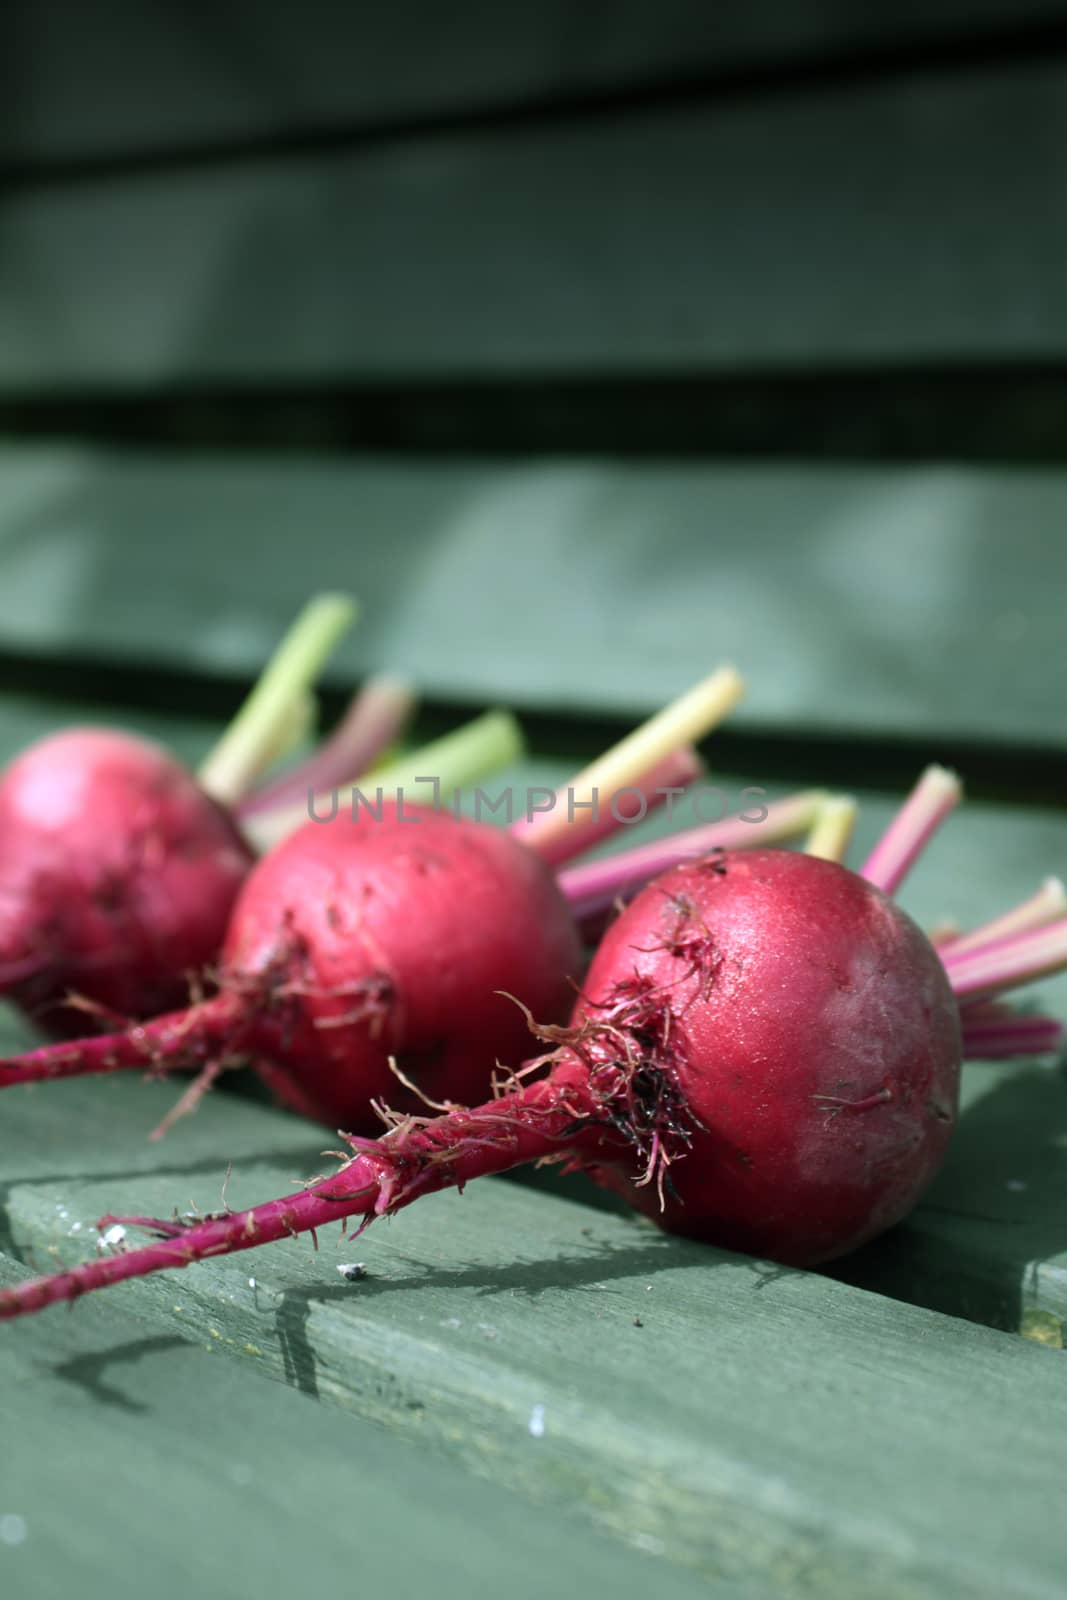 Detail of three freshly picked beetroots, Chioggia, an Italian heirloom variety, with remains of stems attached. Set on a rustic green wooden garden bench base on a portrait format.